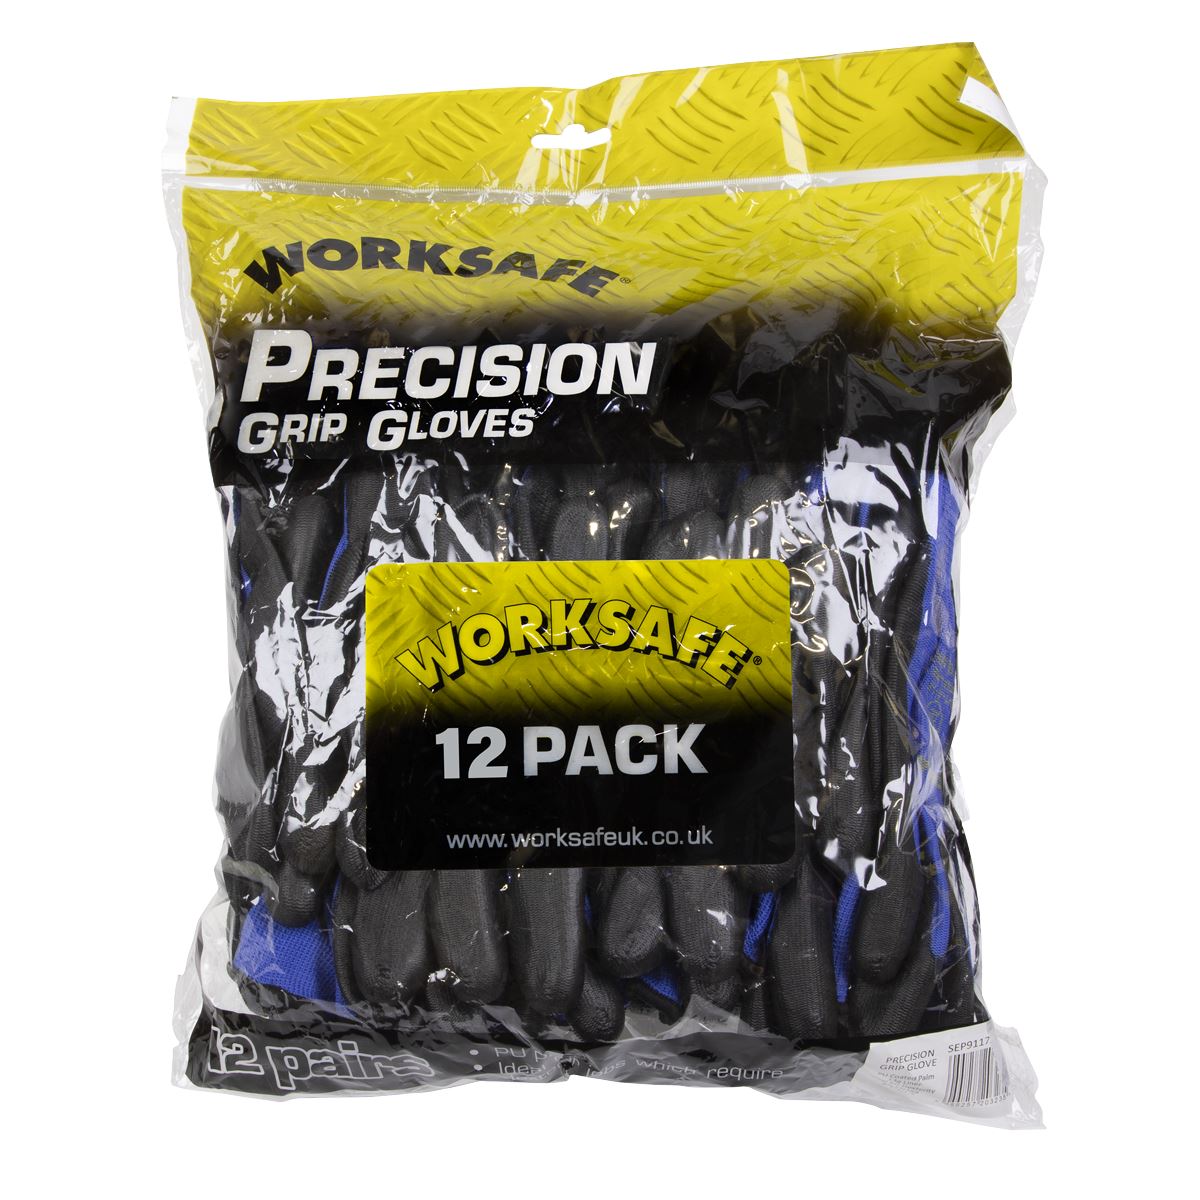 Worksafe by Sealey Lightweight Precision Grip Gloves (Large) - Pack of 12 Pairs